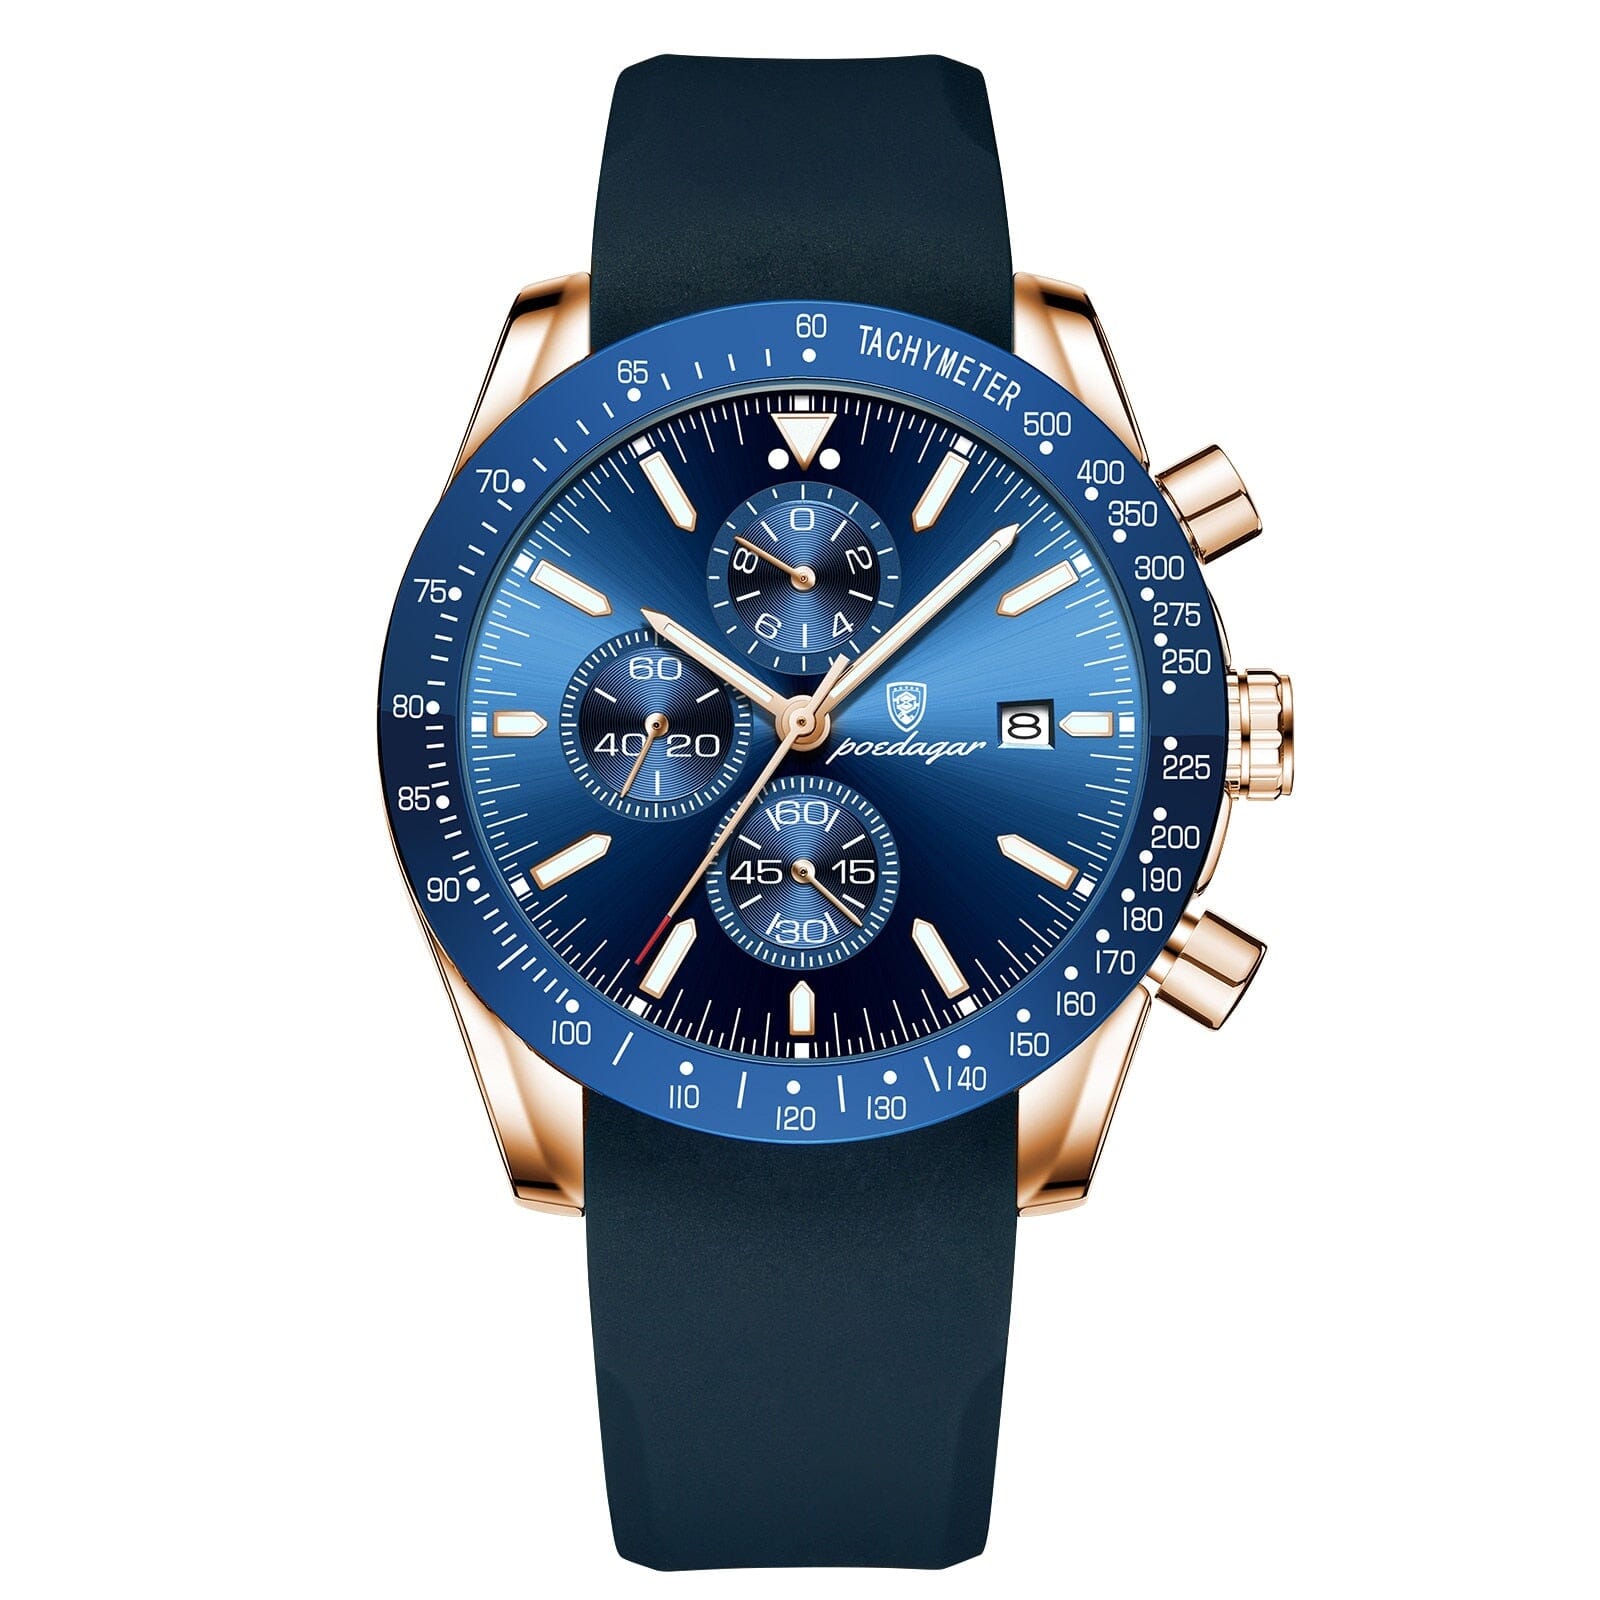 POEDAGAR Luxury Casual Sport Watch - Stay Fashionably on Time with Ease! - Water Resistant, Durable and Chic Mechanical Watches PikNik Gold Blue Silicone 